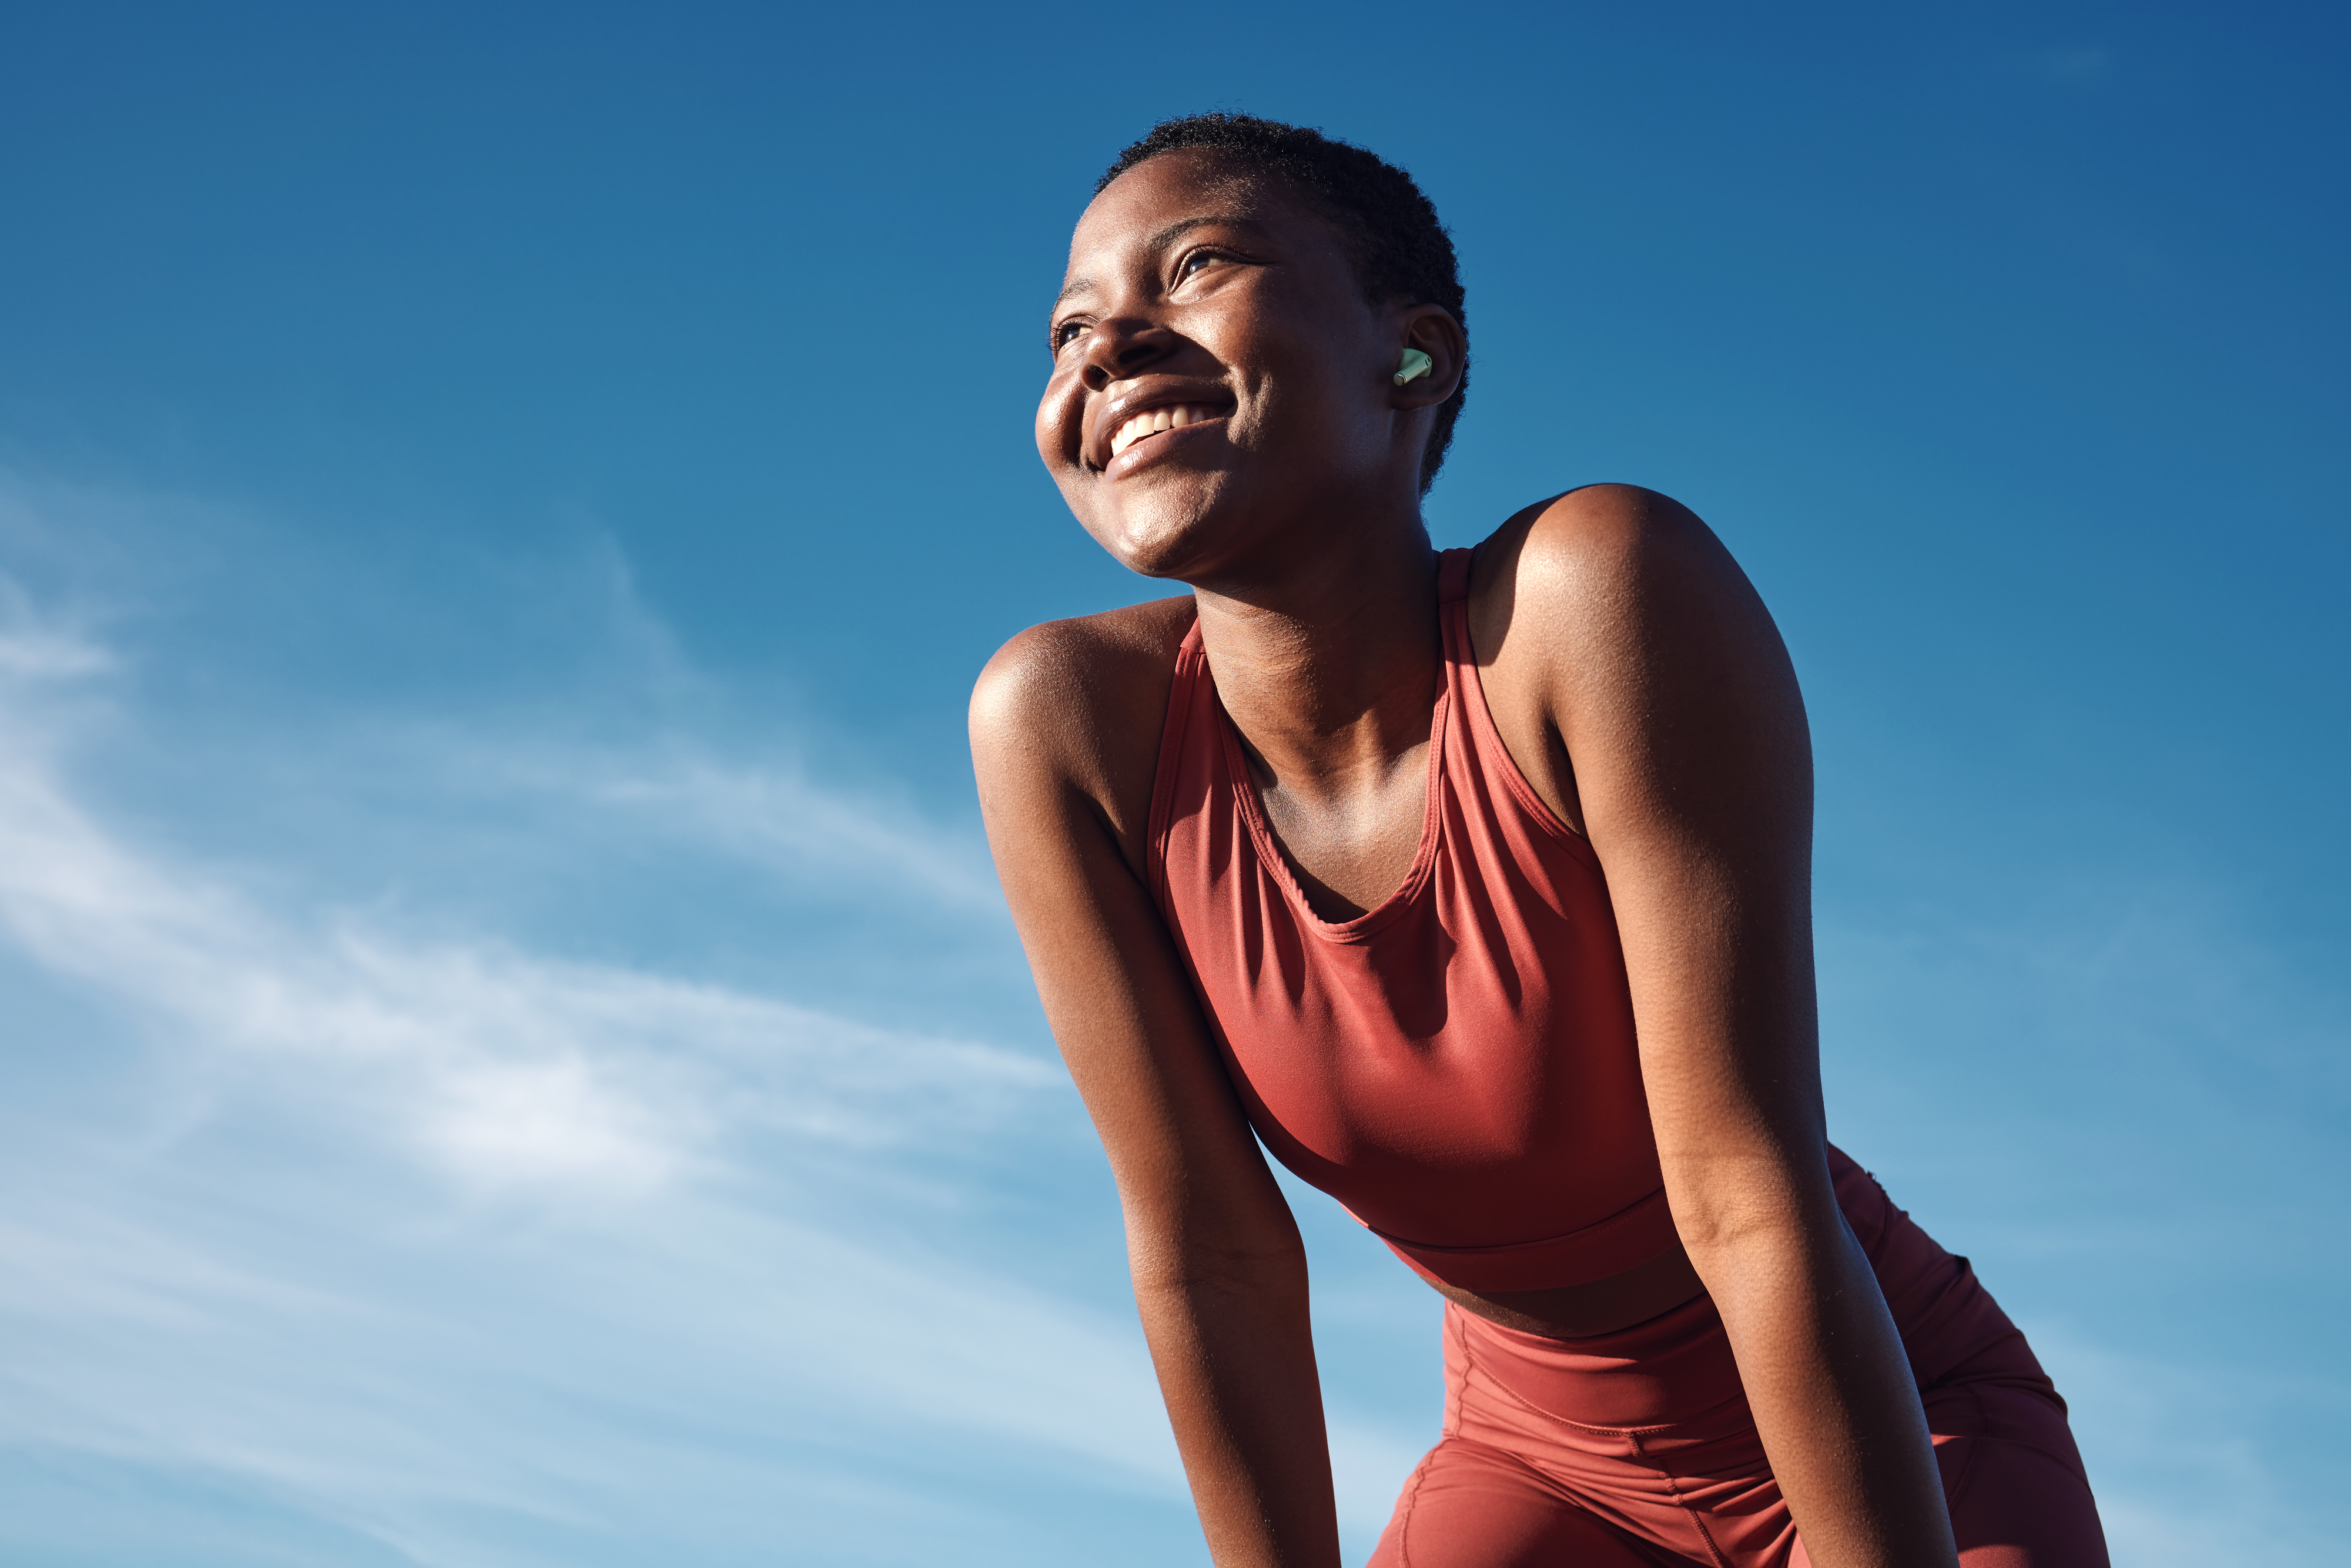 Woman in sportswear smiling against sky, possibly post-exercise, reflecting resilience and joy in fitness journey